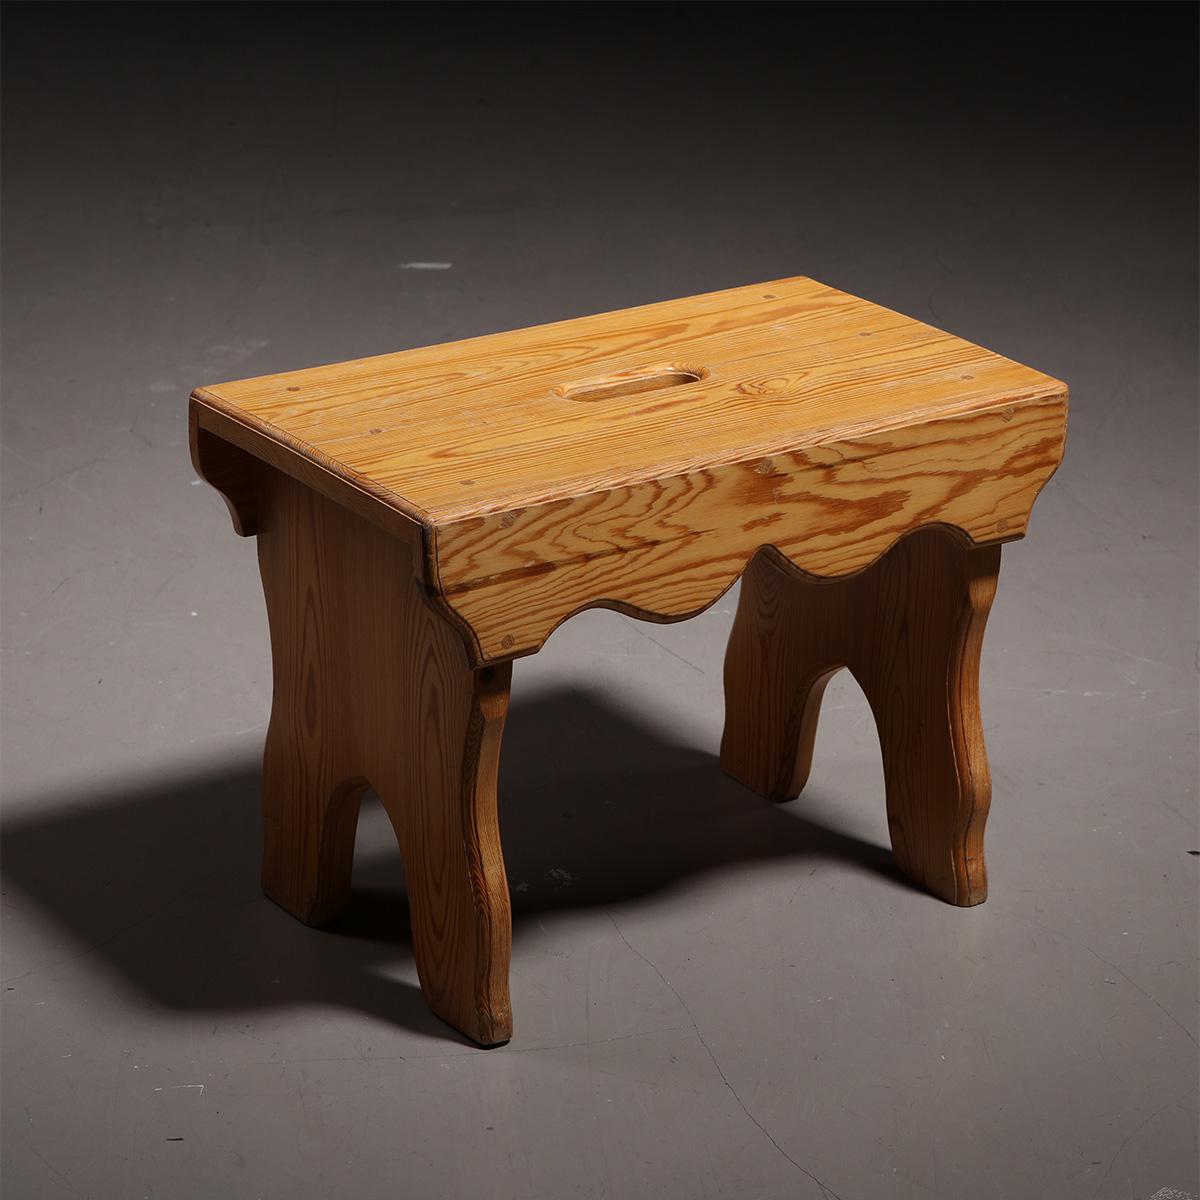 Swedish Scandinavian Sculptural Pine Stool or Side Table, 1940s For Sale